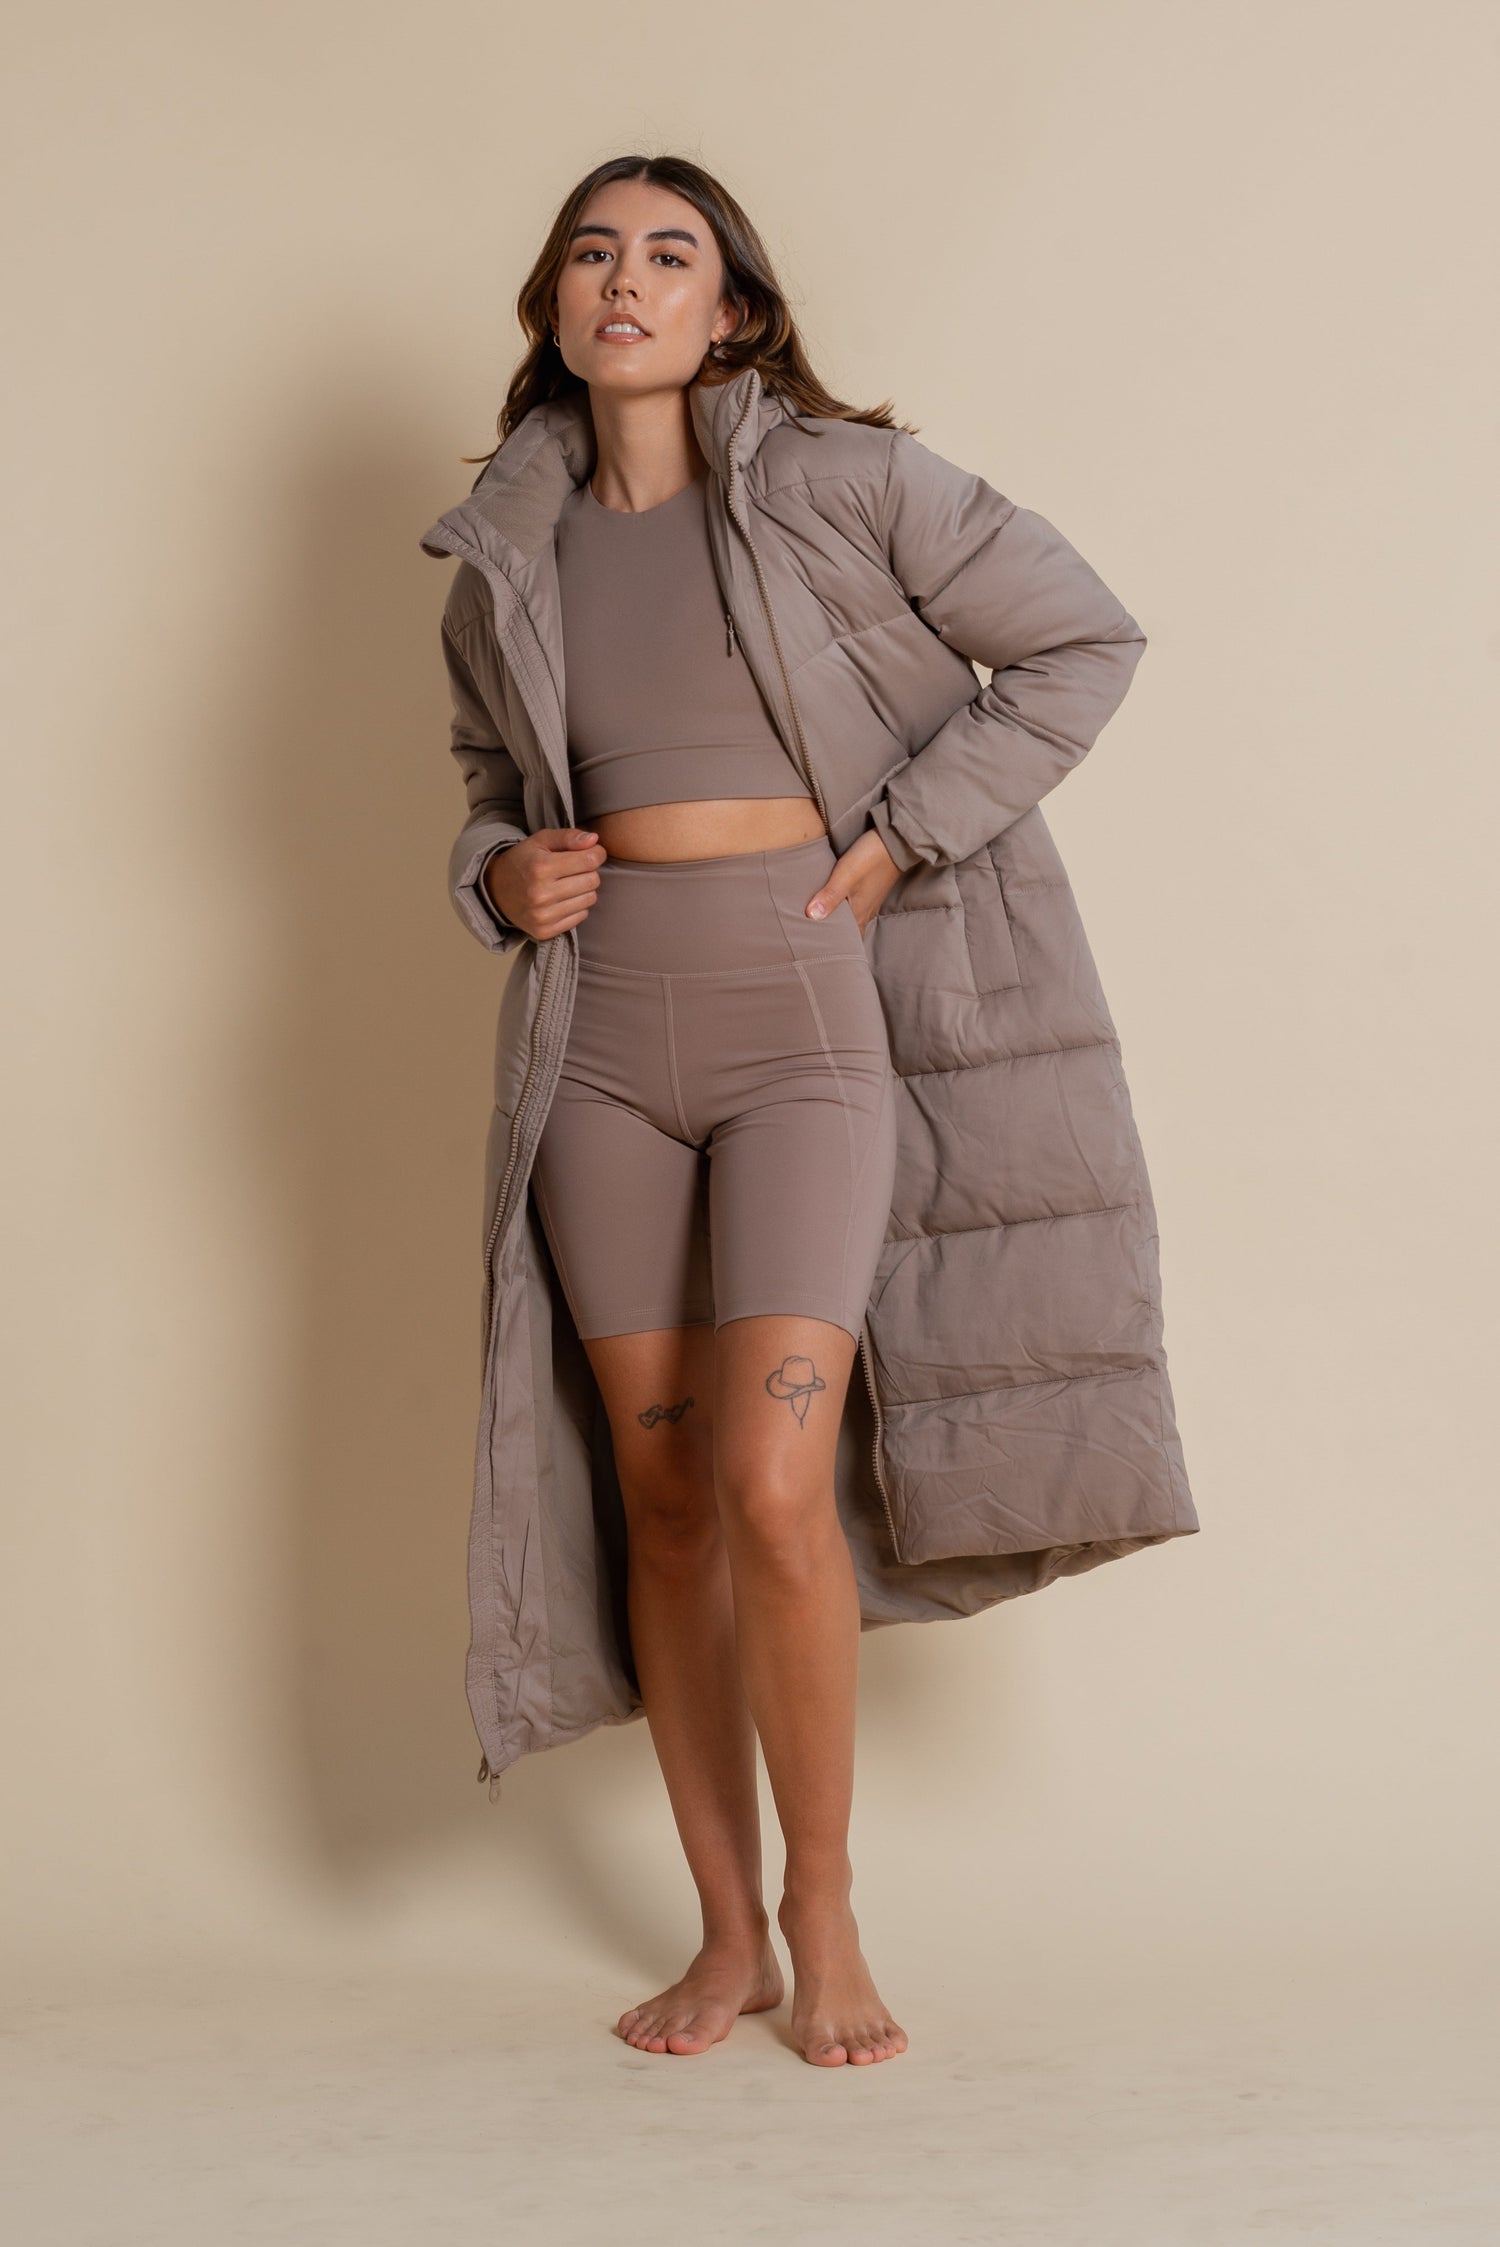 Girlfriend Collective - W's Long Puffer Jacket - Recycled PET - Weekendbee - sustainable sportswear